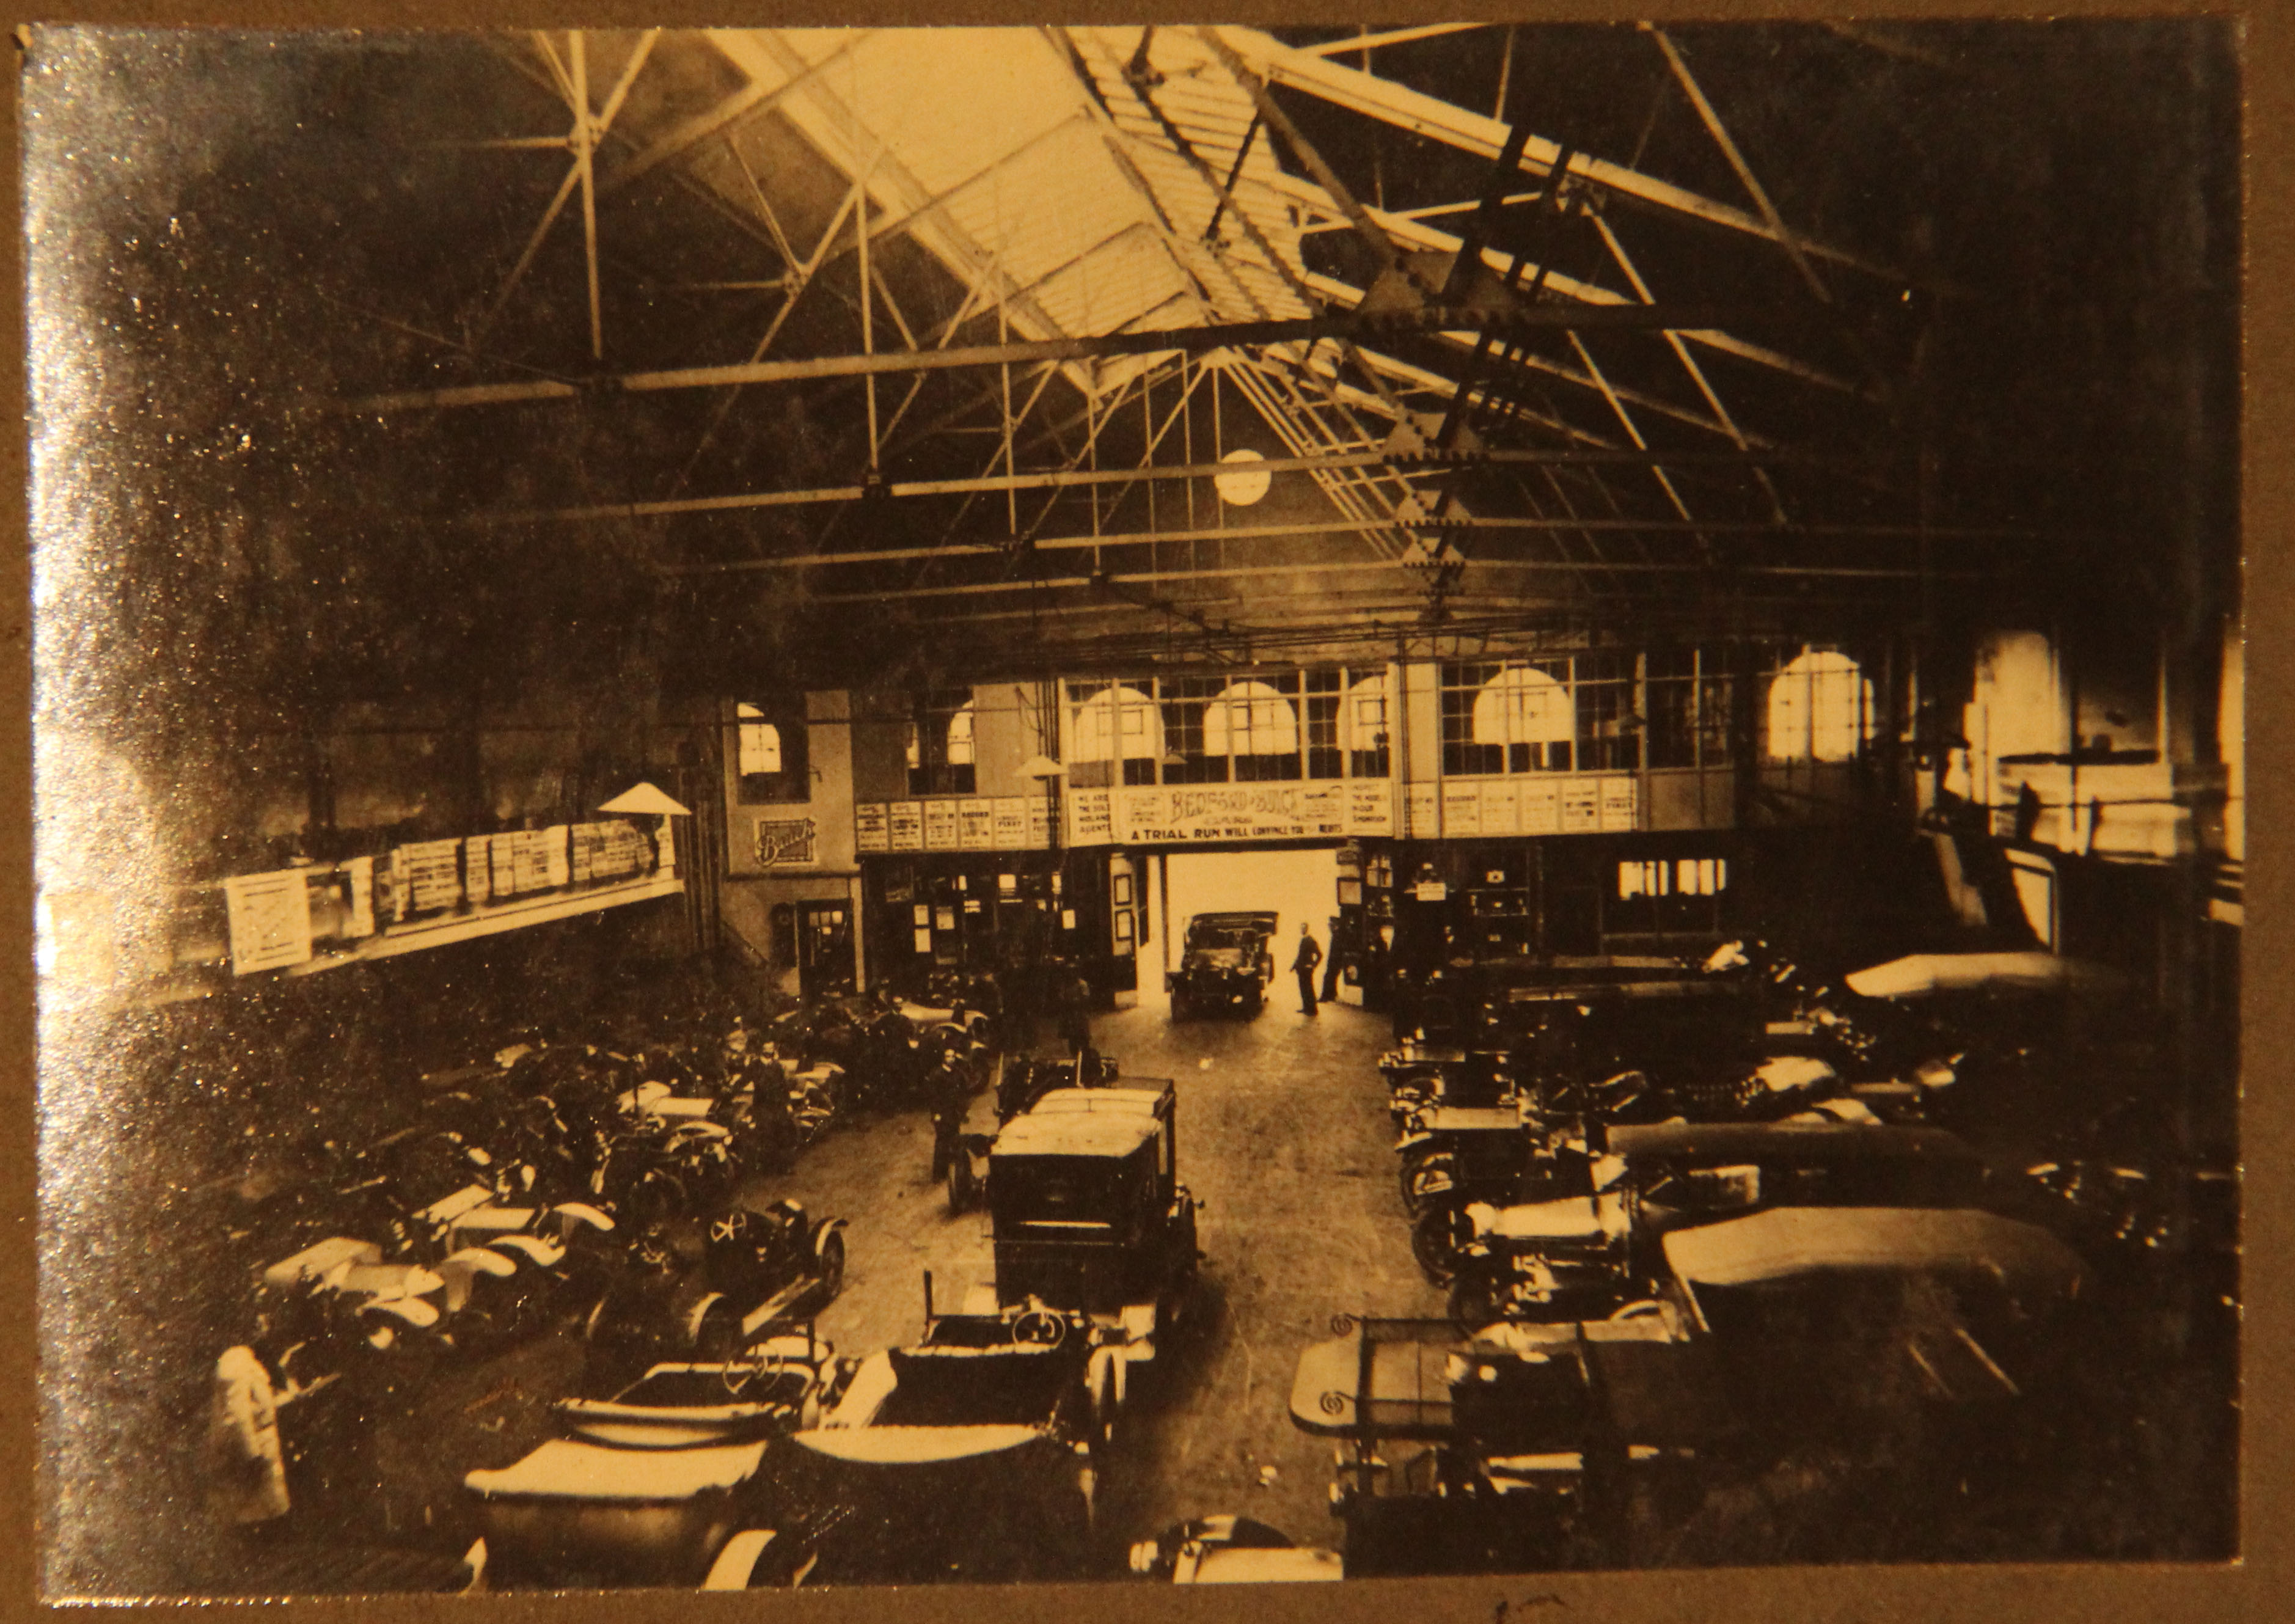 The Birmingham Garages Ltd. Authorised Dealers for Wolseley Cars. - Image 8 of 12